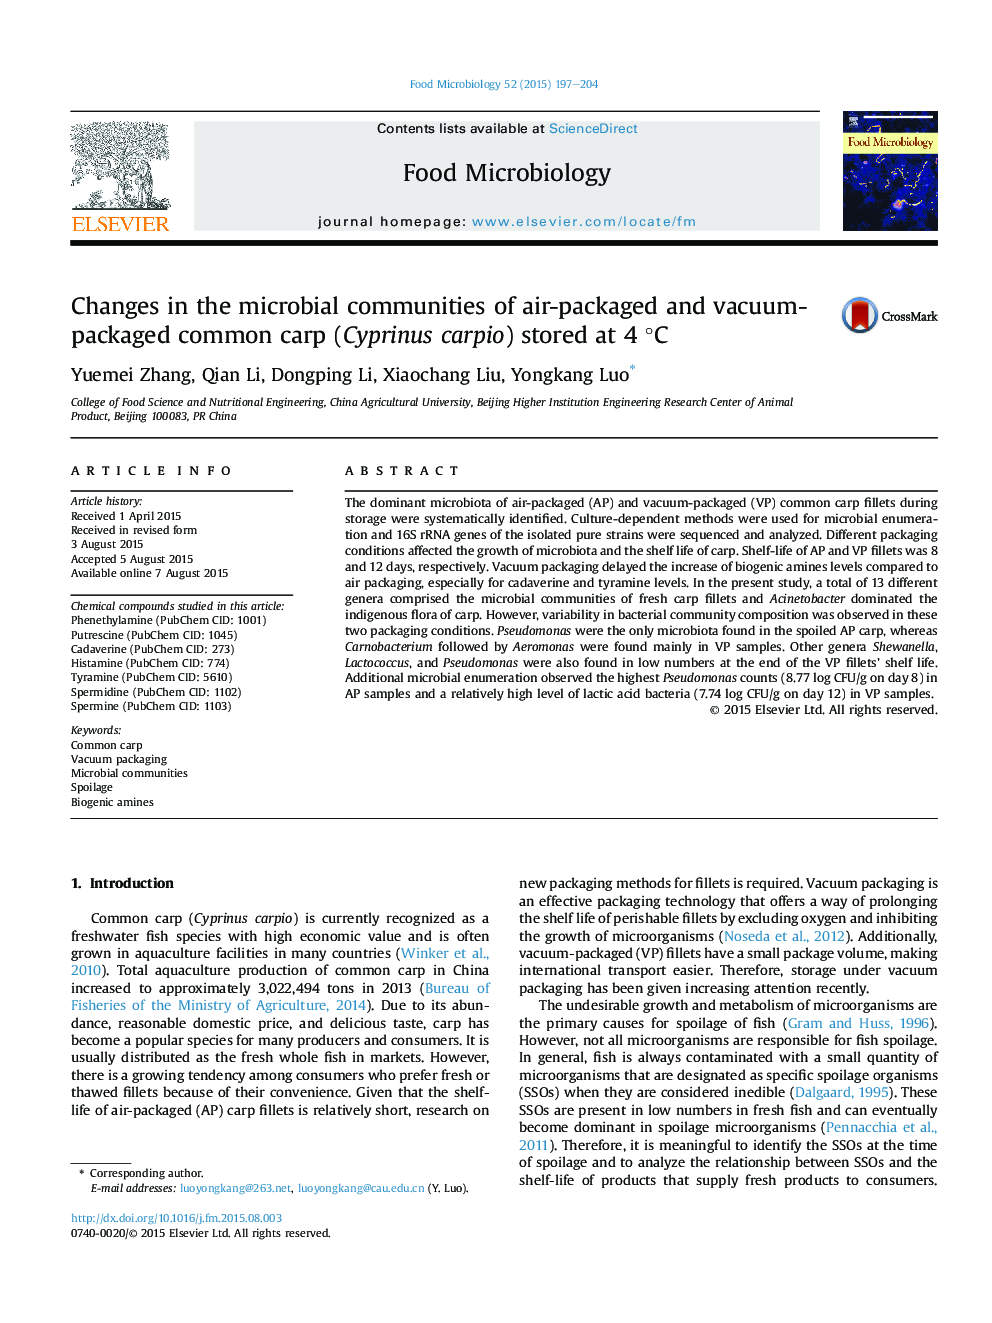 Changes in the microbial communities of air-packaged and vacuum-packaged common carp (Cyprinus carpio) stored at 4Â Â°C